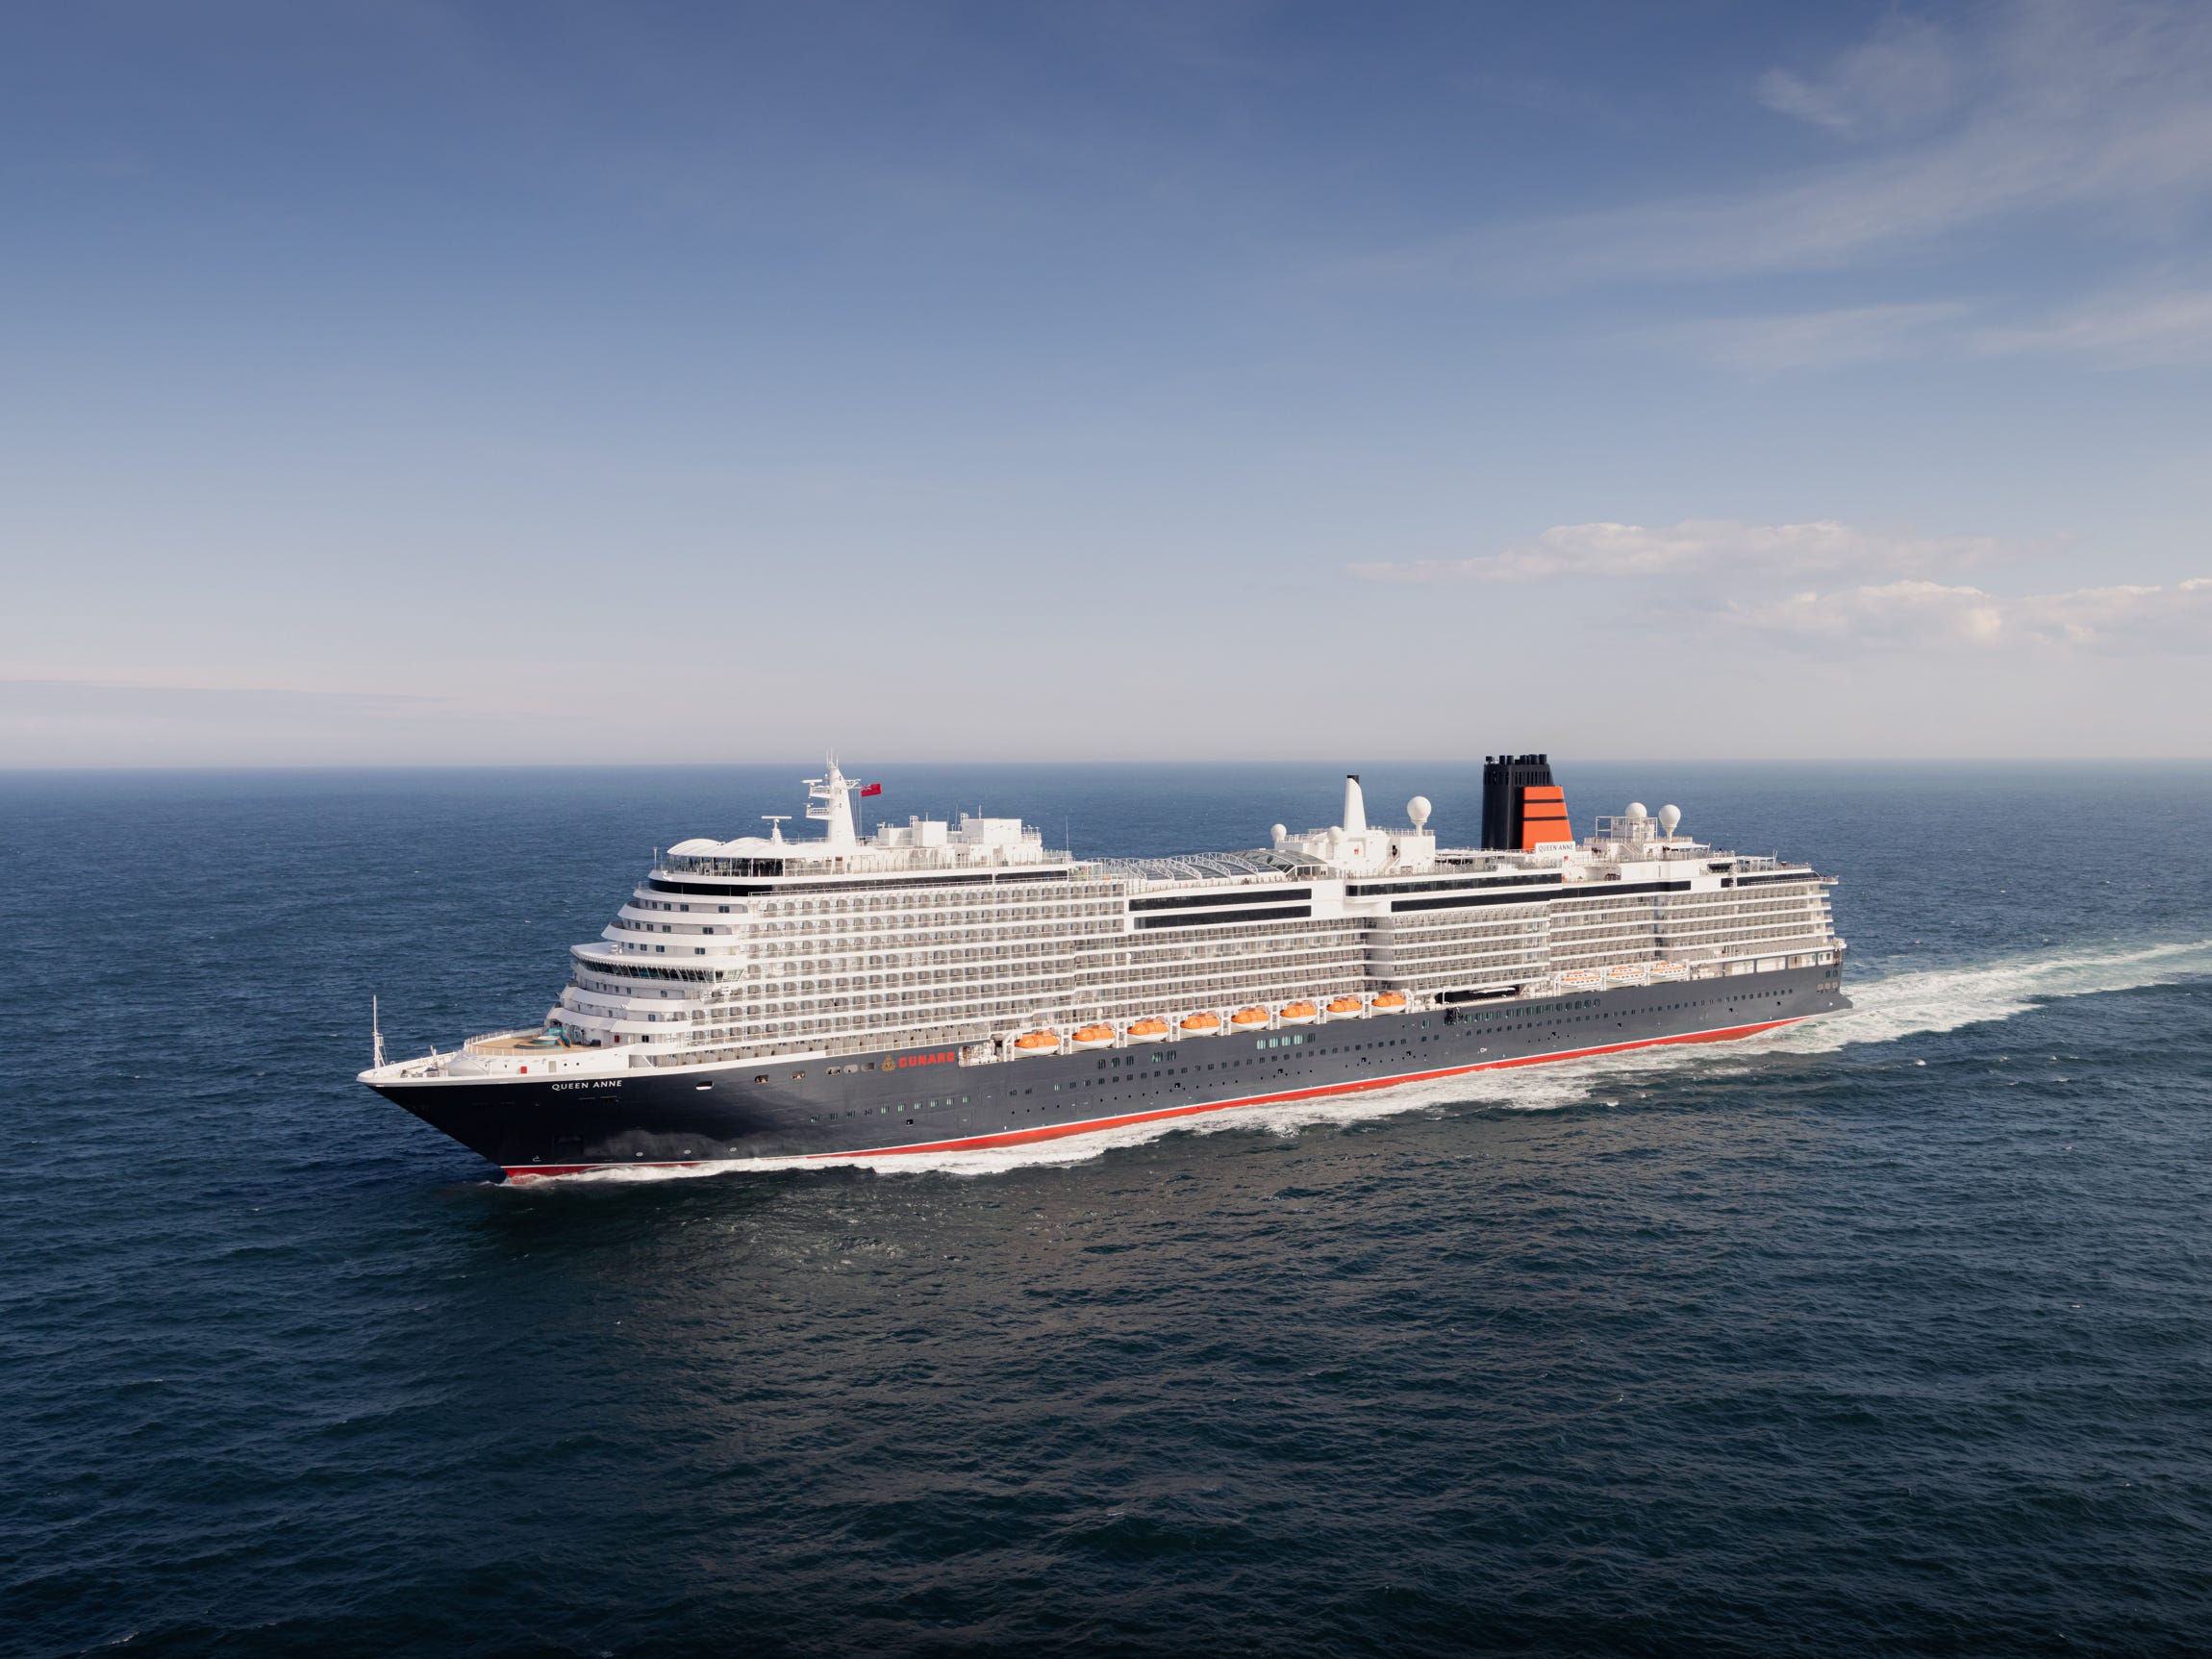 <ul class="summary-list"><li><a href="https://www.businessinsider.com/cruise-ships-turned-into-hotels-shelters-reefs-photos-2023-7">Cunard</a> welcomed its fourth ship and newest in 14 years, the 2,996-guest Queen Anne.</li><li>The 114,000-ton vessel has amenities like an Indian restaurant and pool under a retractable glass roof.</li><li>Queen Anne's 2024 itineraries, primarily in Europe, start at $300 per person for a two-night cruise.</li></ul><p><a href="https://www.businessinsider.com/around-the-world-monthslong-cruises-princess-oceania-royal-ultimate-cunard-2024-1">Cunard</a> has operated 249 ships throughout its 184 years in operation, including the famous Queen Mary and Queen Mary 2. But it's been 14 years since the cruise line has launched a new vessel — until now. </p><p><a href="https://www.businessinsider.com/princess-cruises-all-inclusive-world-cruise-4-months-2024-5">Luxury cruisers</a>, meet Queen Anne. It's Cunard's latest 2,996-guest ship, replete with 4,300 art pieces, archery, and the company's signature high-end flair. Its arrival was so highly anticipated that every cabin on its May 3 maiden voyage was fully reserved in minutes, the BBC reported.</p><div class="read-original">Read the original article on <a href="https://www.businessinsider.com/cunard-new-luxury-cruise-ship-queen-anne-2024-5">Business Insider</a></div>